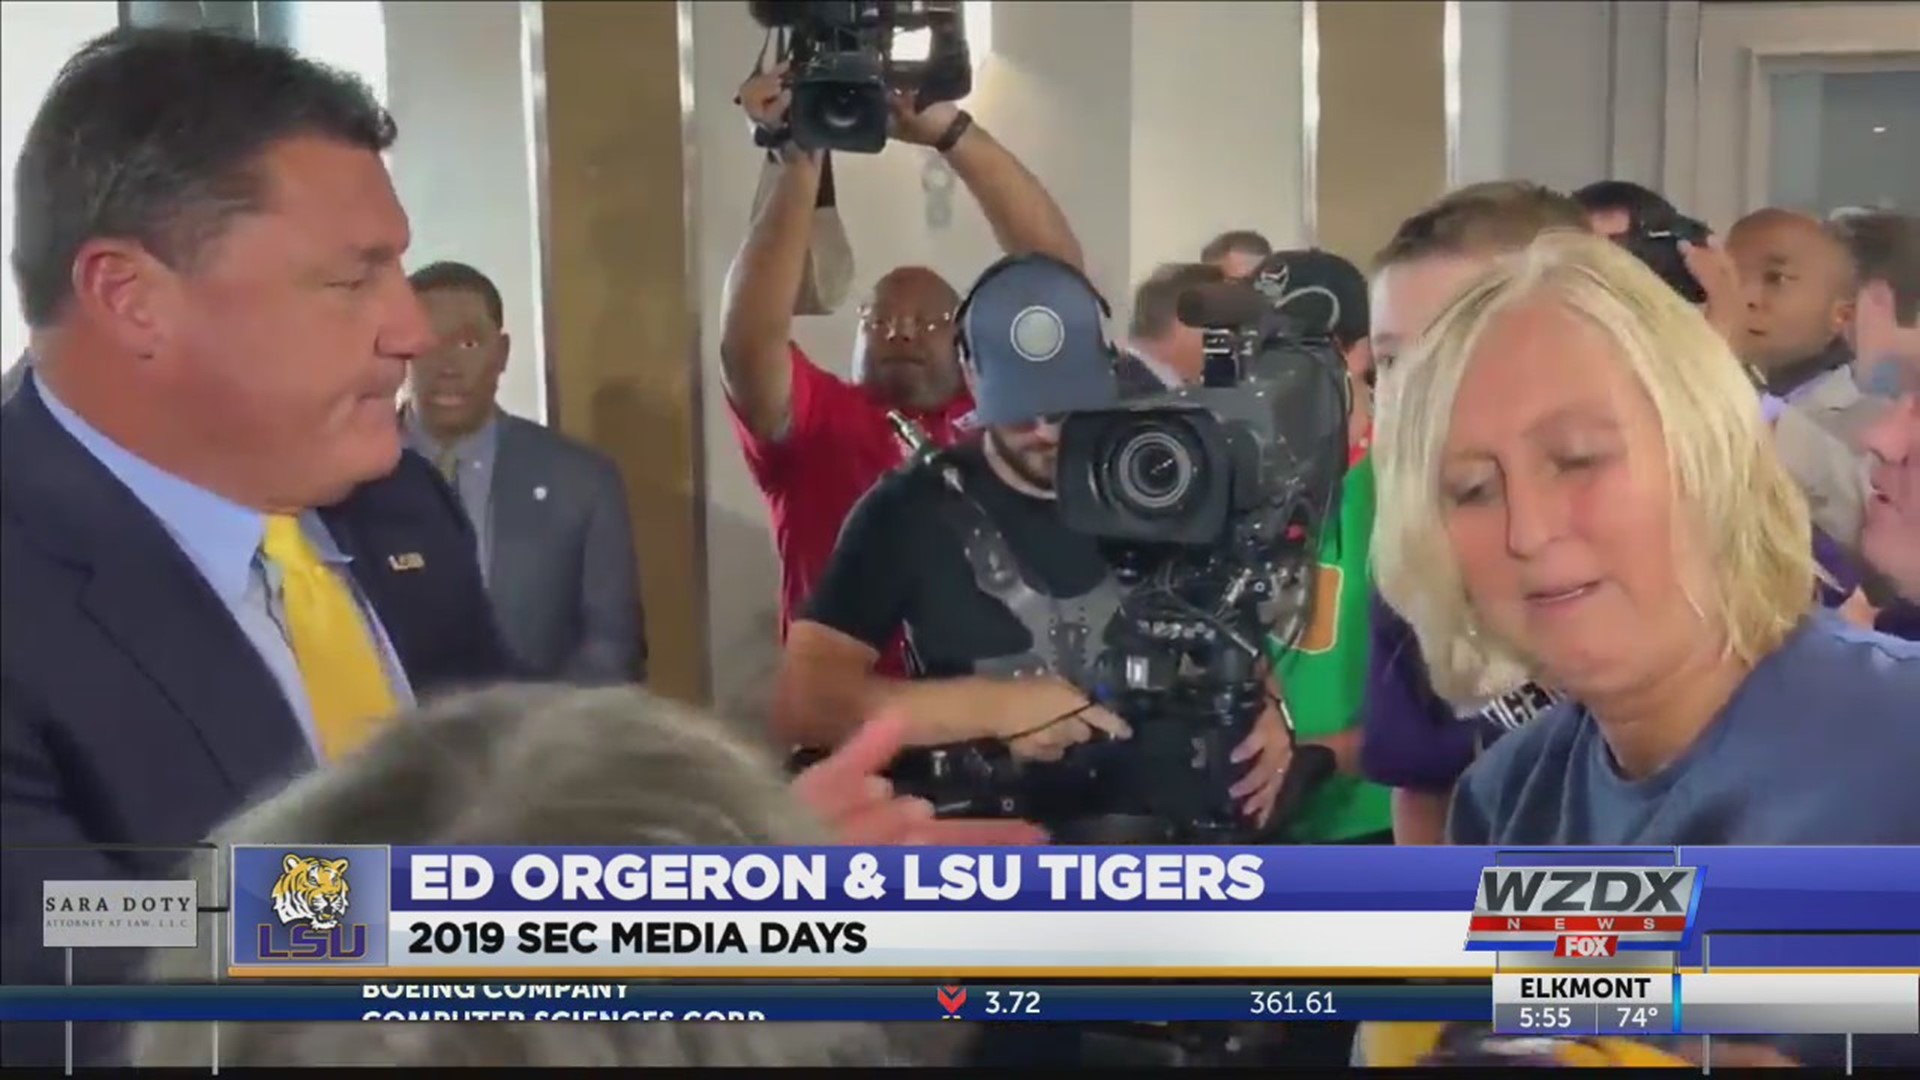 Every year, Coach Ed Orgeron and the LSU consider beating Alabama as a benchmark for their program. Today at SEC Media Days, the head coach of the Bayou Bengals talked about the importance playing well against such a tough schedule.